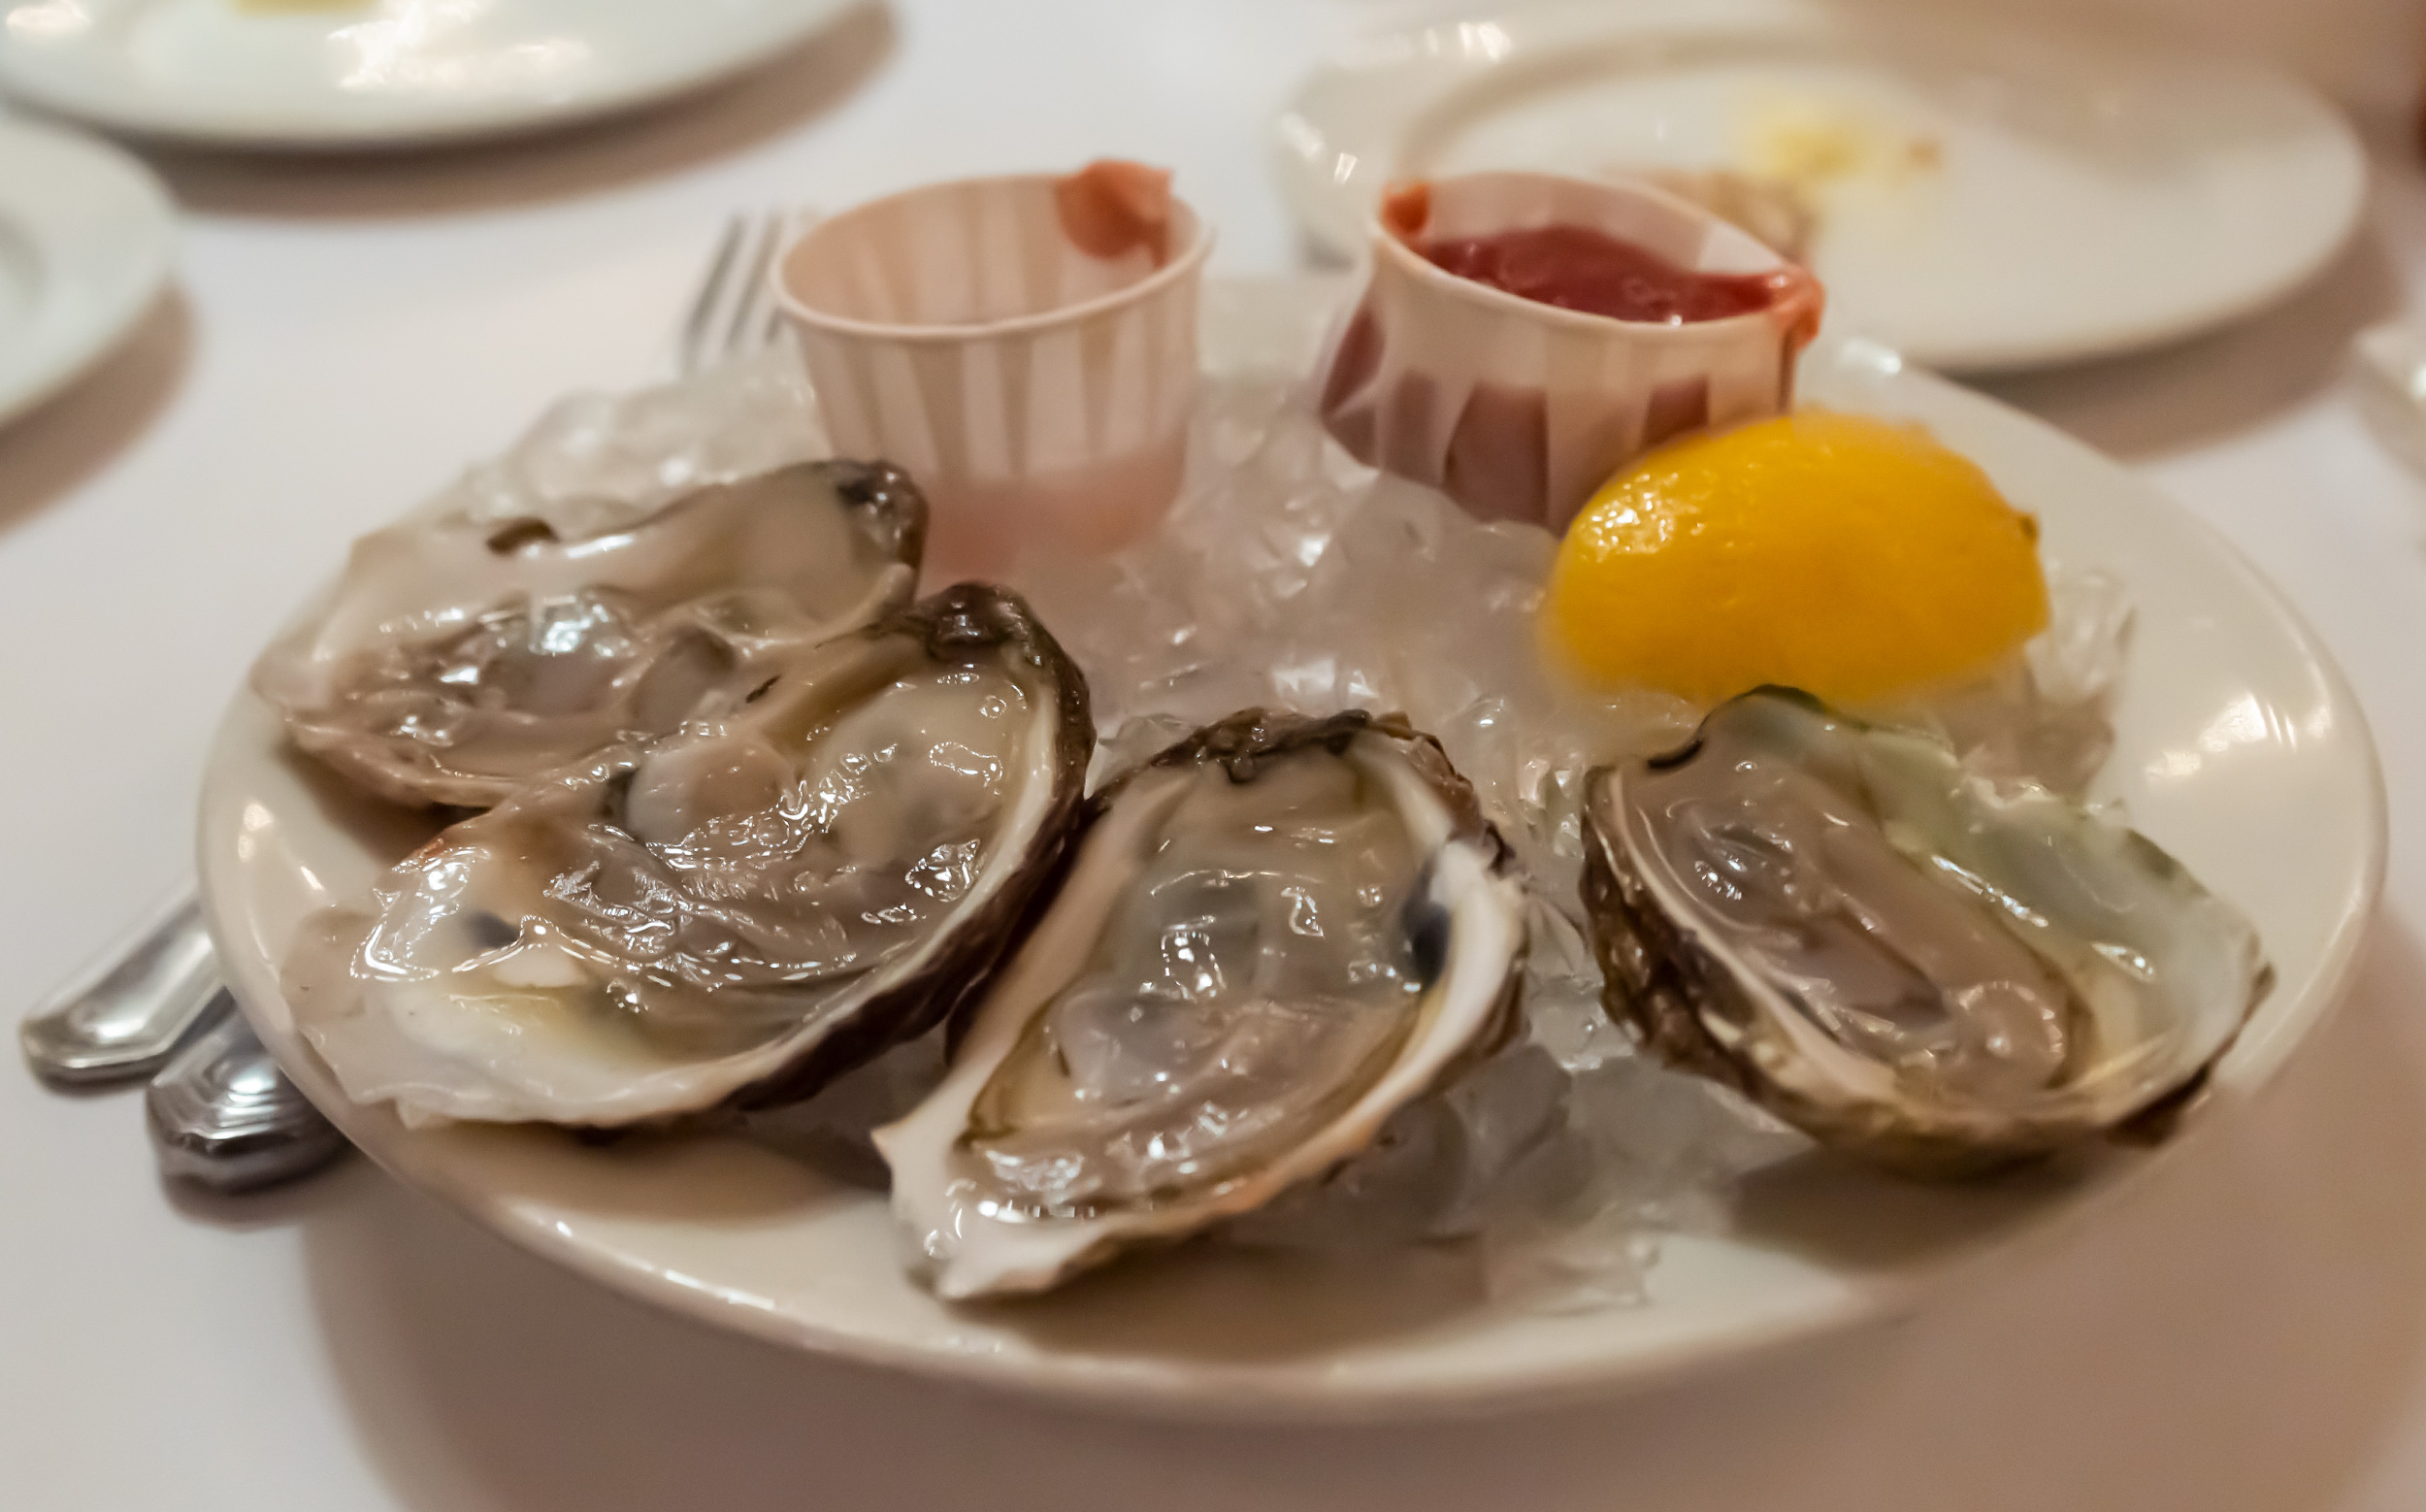 89 E 42nd St, New York, NY : Grand Central Oyster Bar